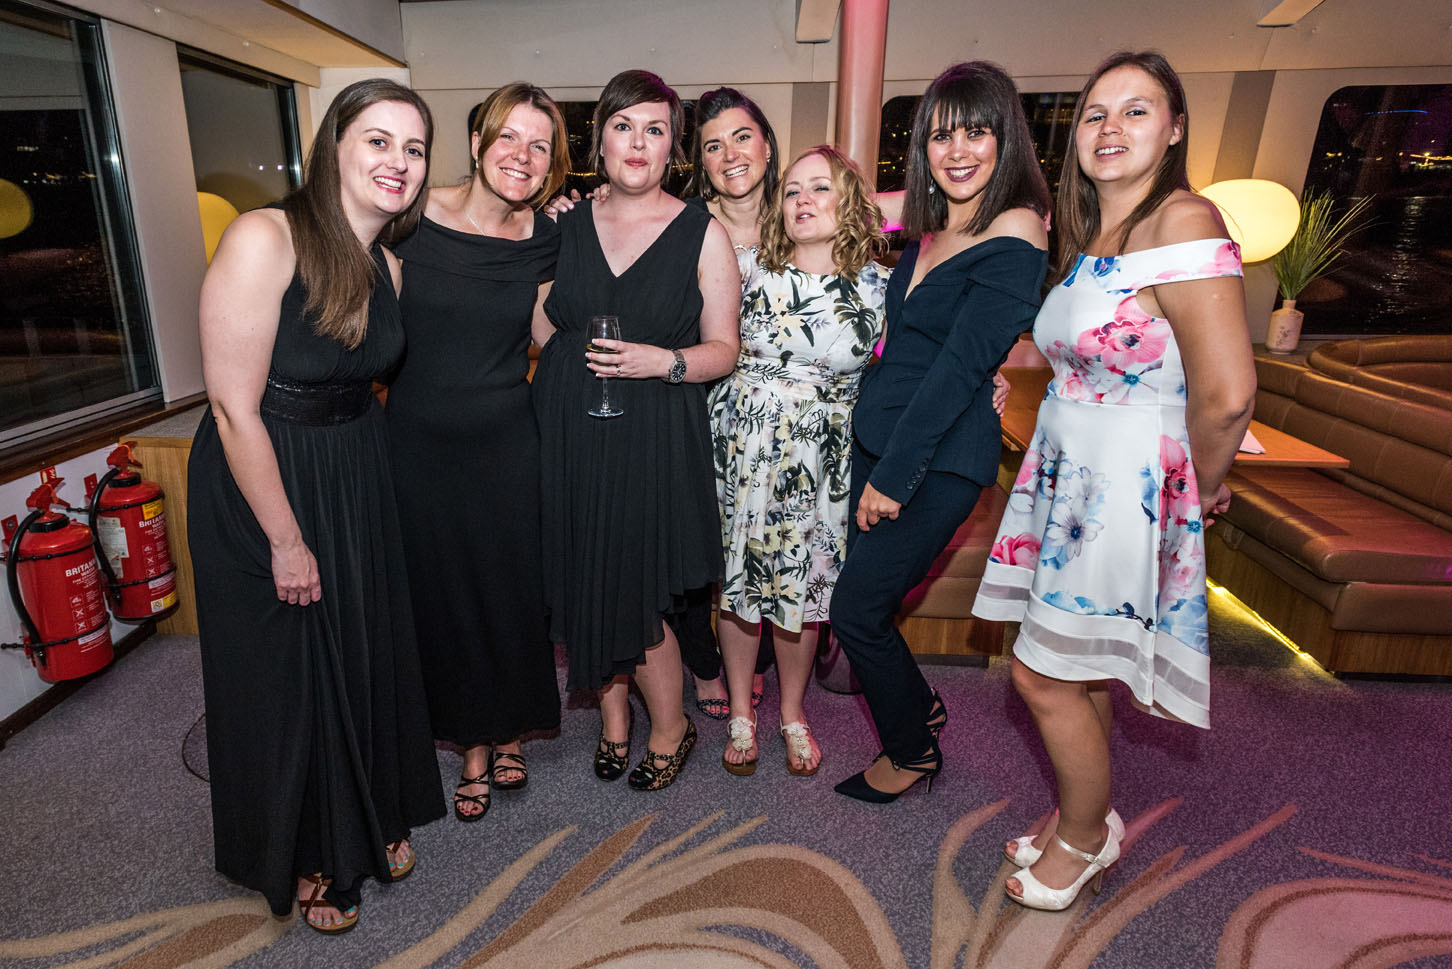 The women of the Boots analytics team